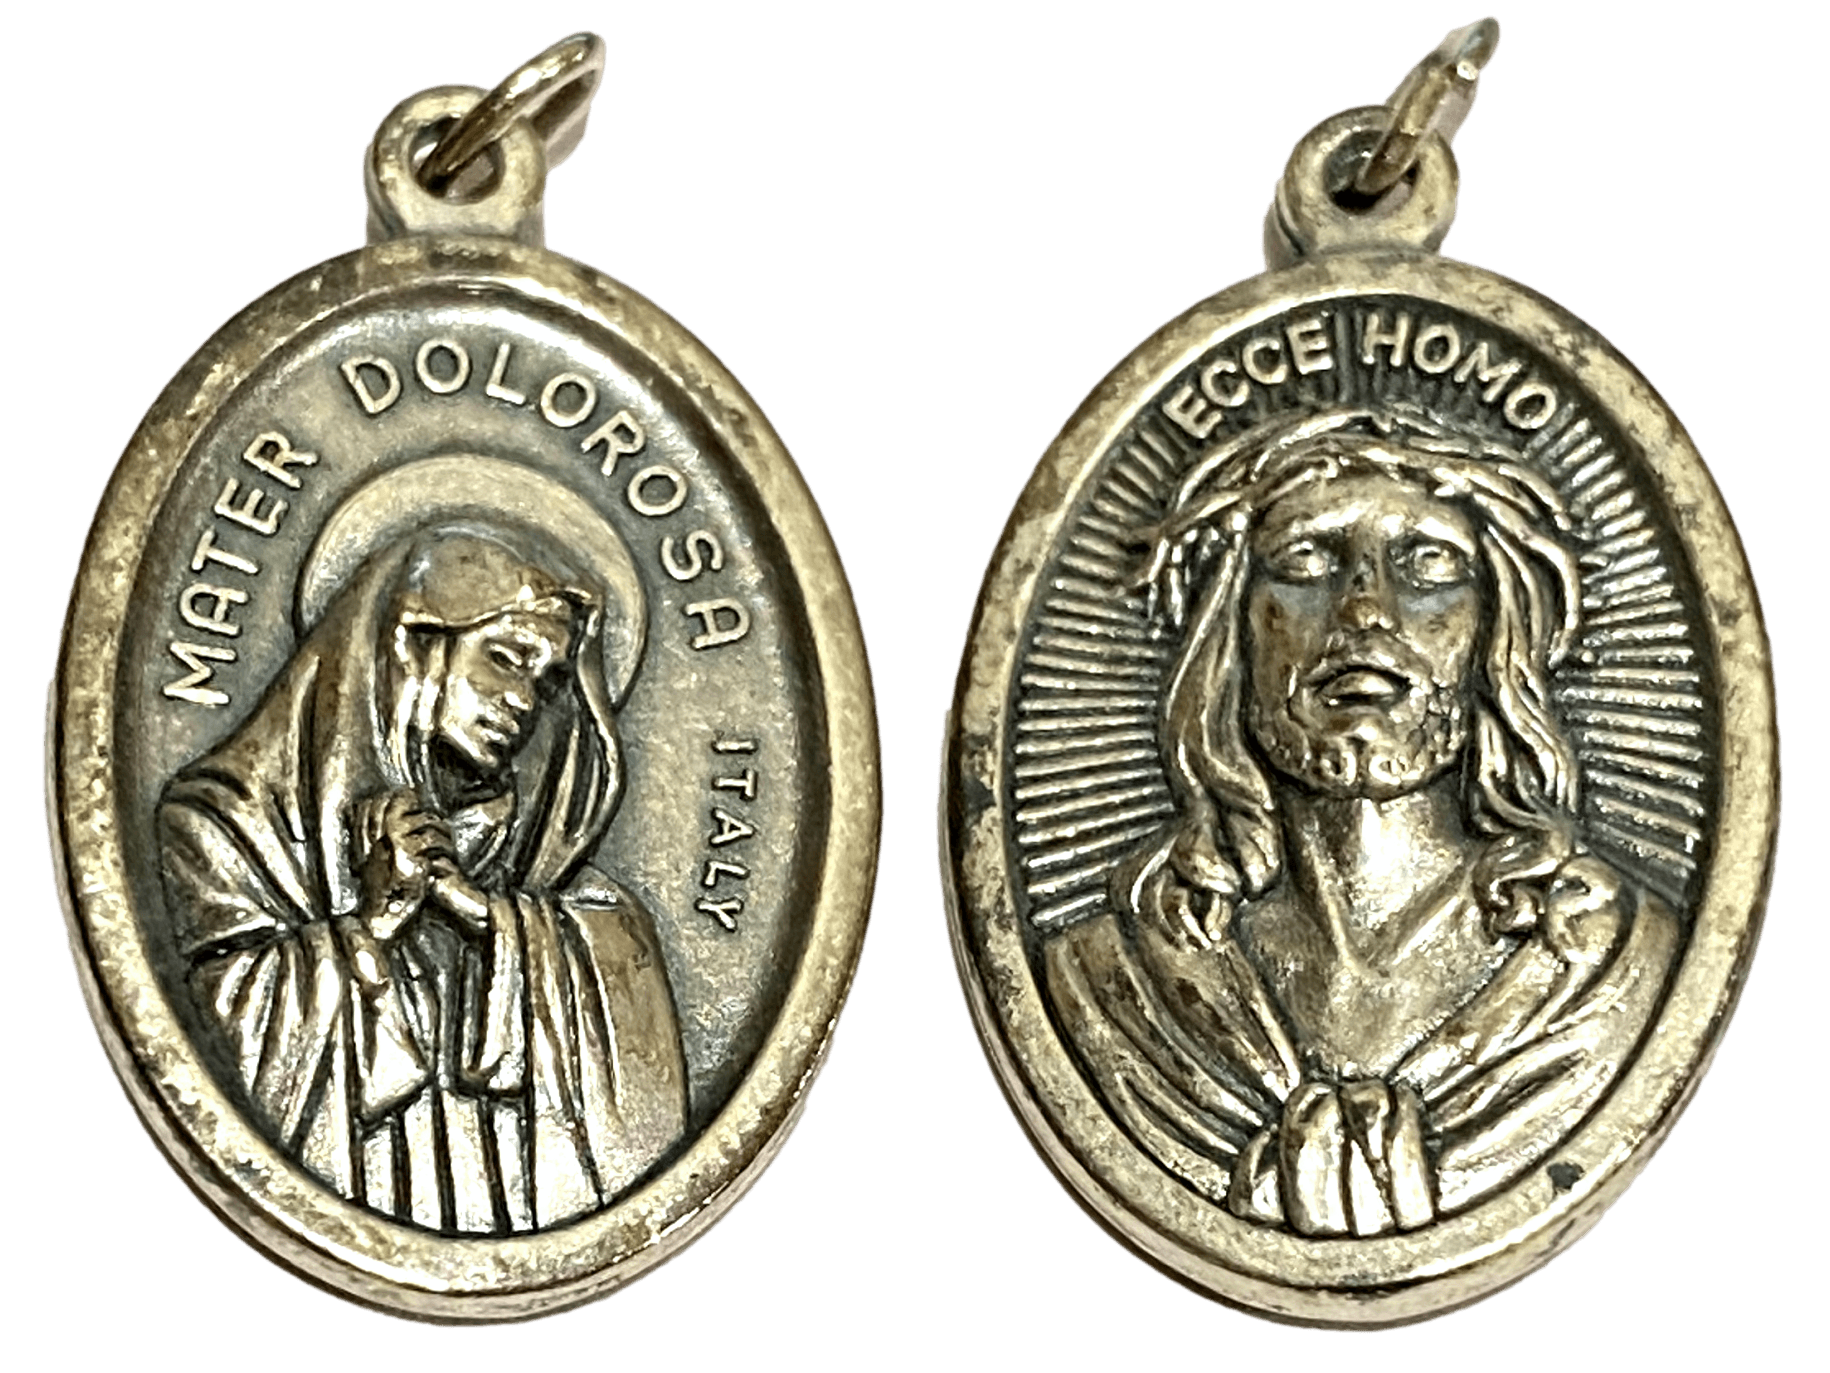 Medal Sorrowful Mother Mater Dolorosa Behold the Man Ecce Homo Italian Double-Sided Silver Oxidized Metal Alloy 1 inch - Ysleta Mission Gift Shop- VOTED El Paso's Best Gift Shop